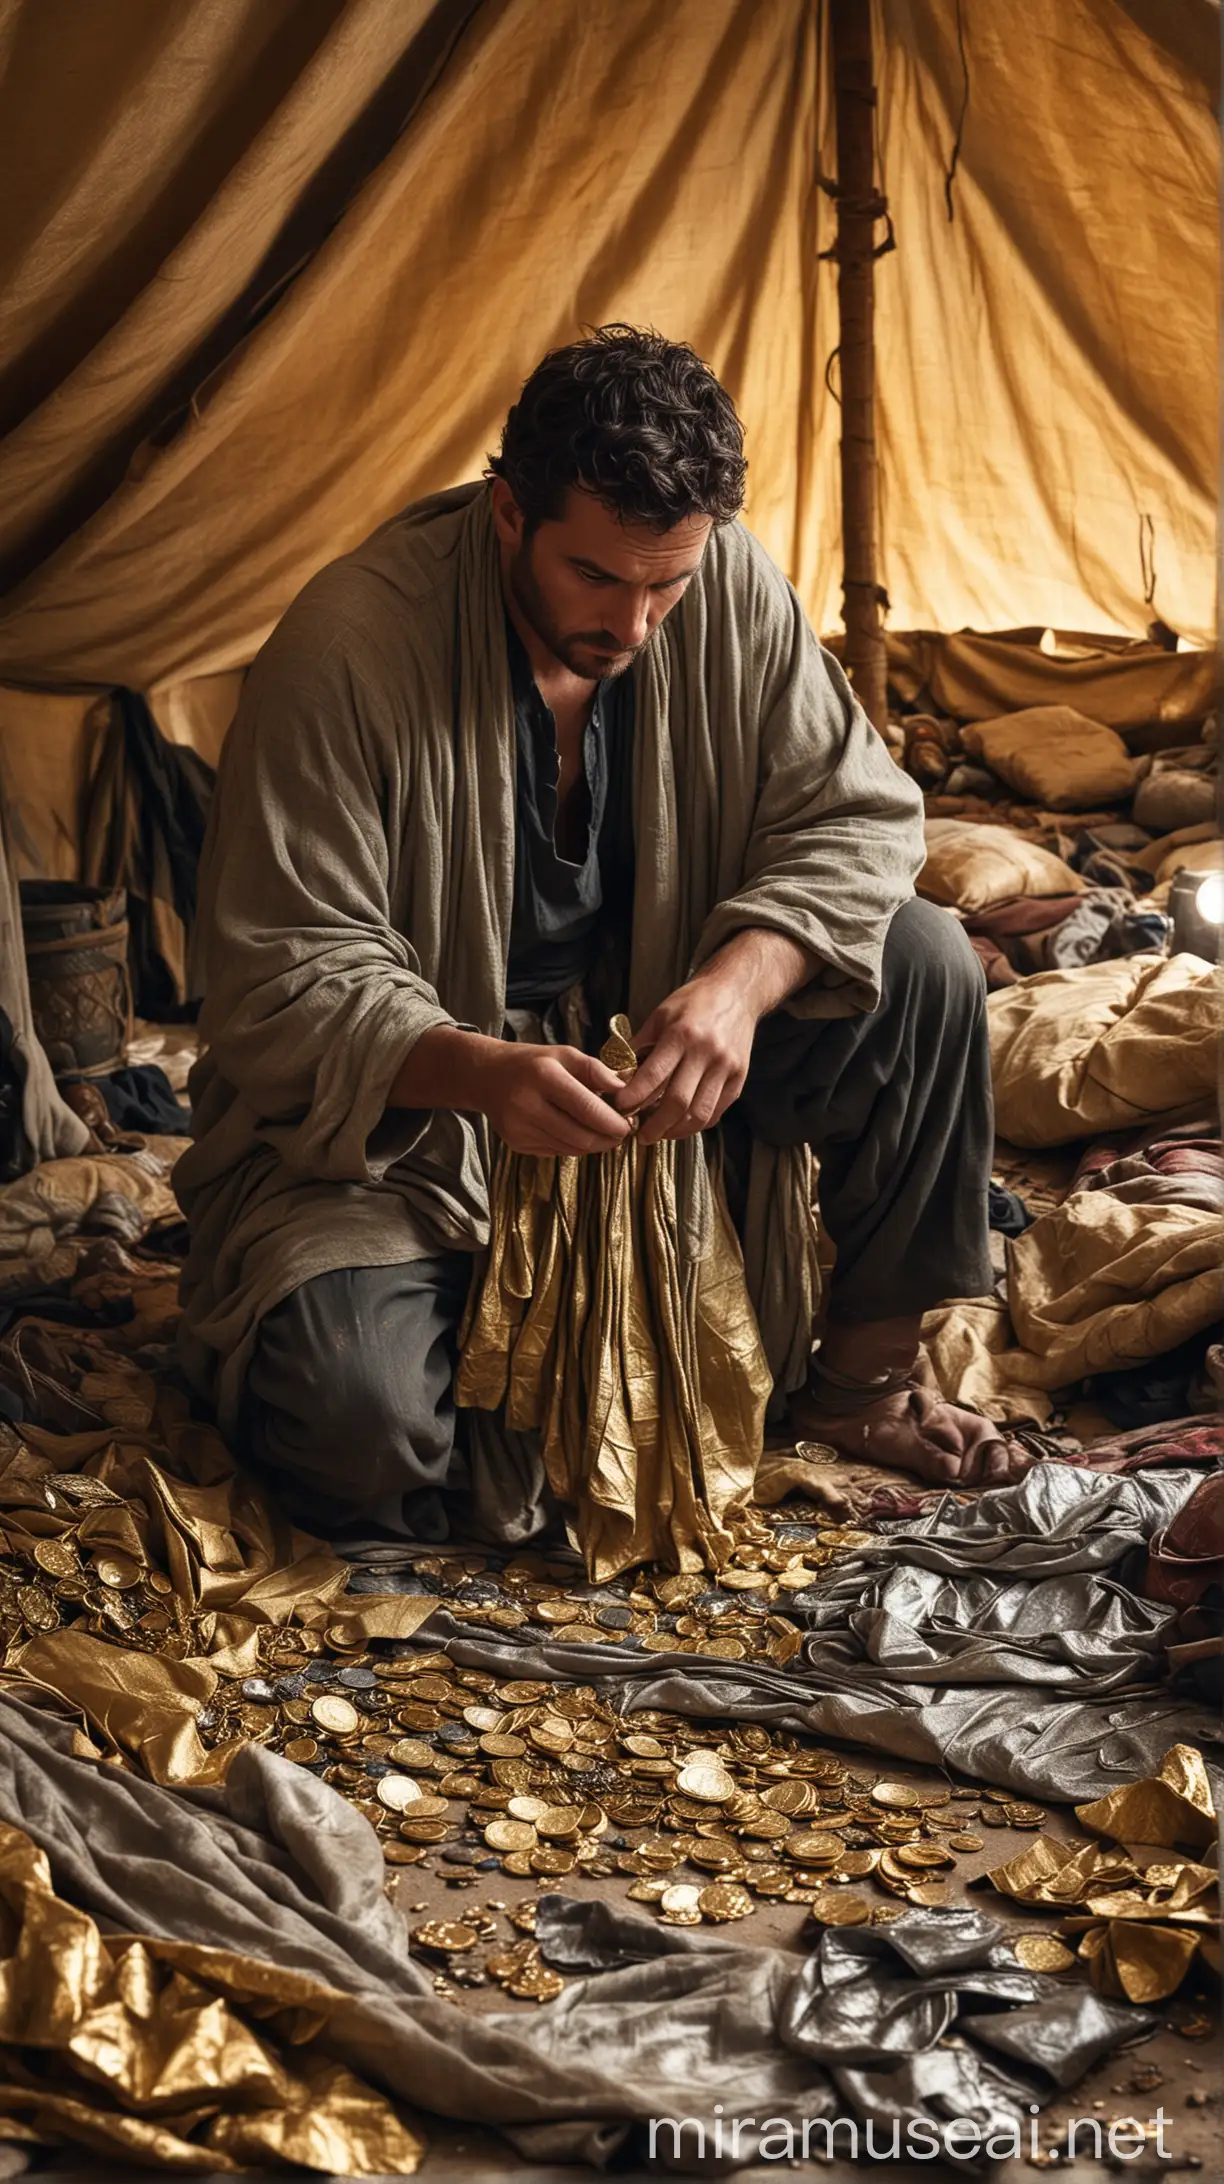 Stealthy Man Taking Garment Gold and Silver from Ancient Tent